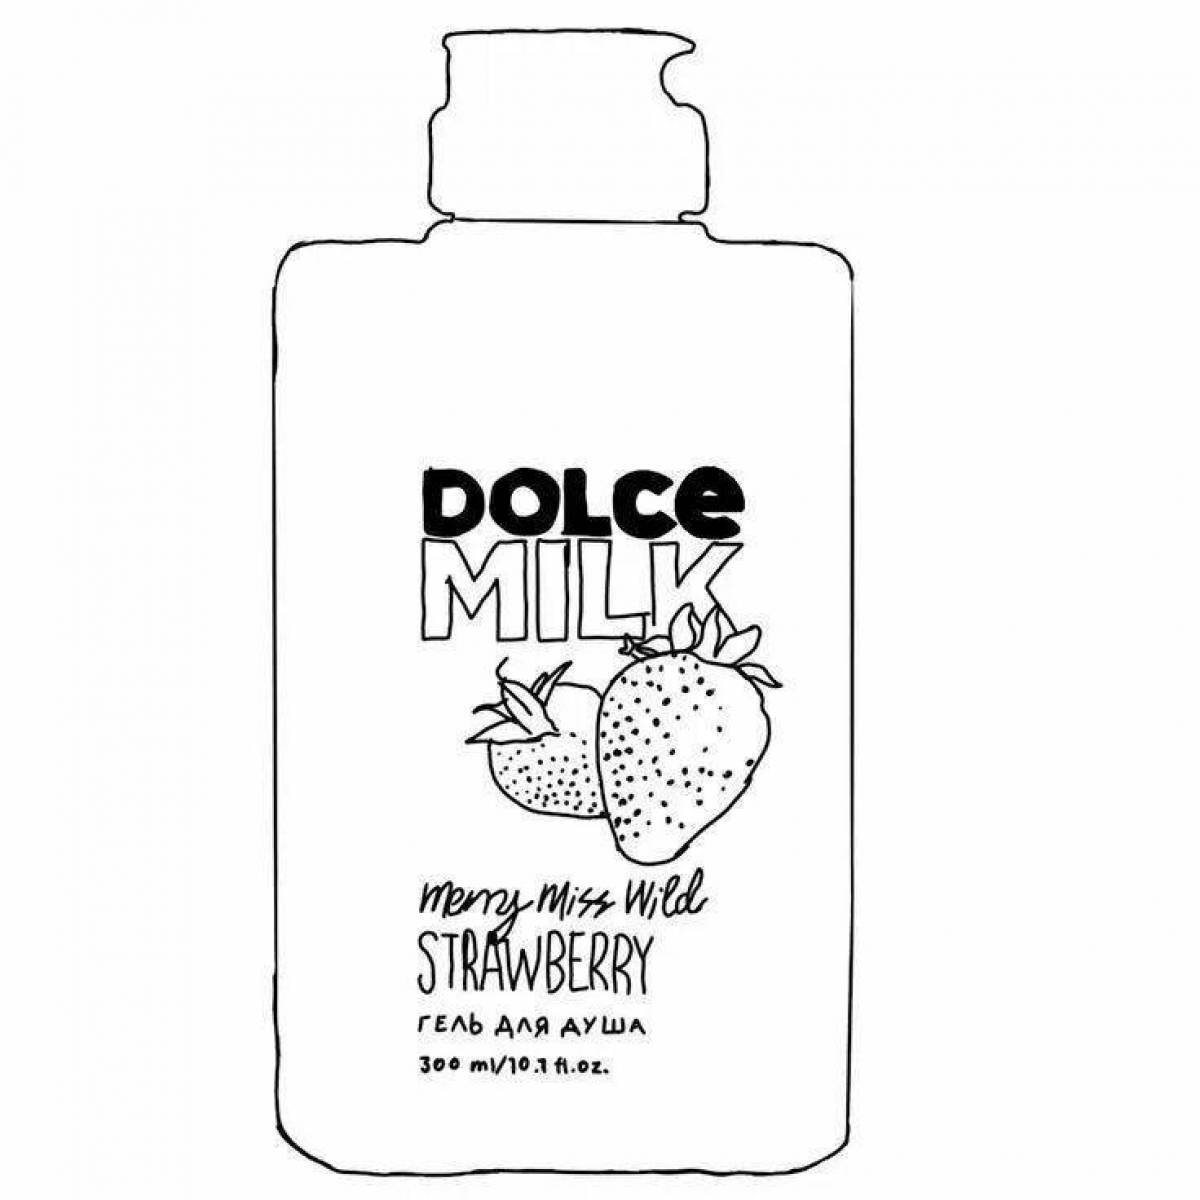 Dolce milk antiseptic incredible coloring book